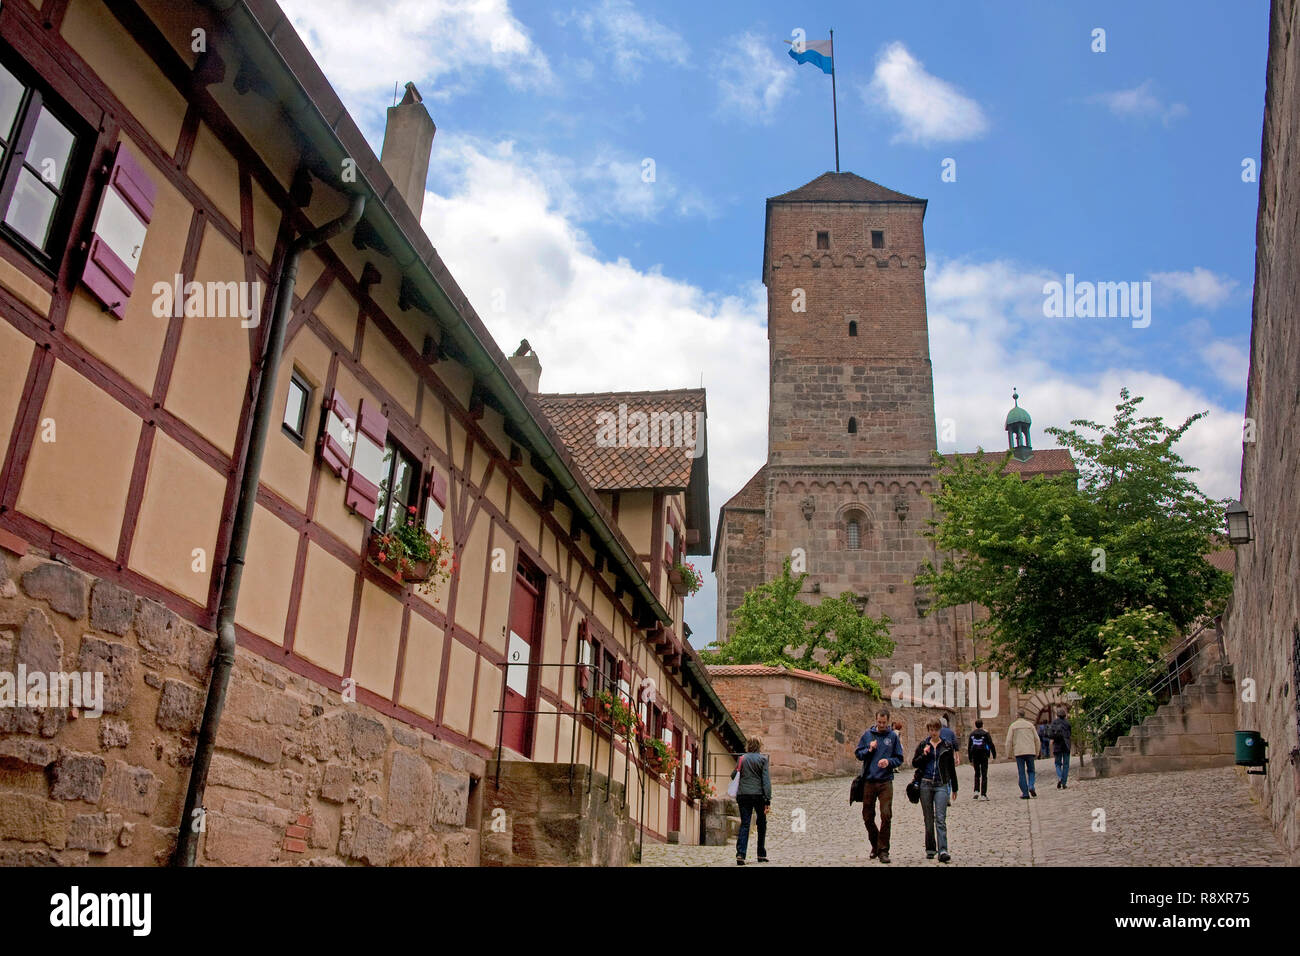 Heiden tower and half timbered houses at Imperial Castle, old town of Nuremberg, Franconia, Bavaria, Germany, Europe Stock Photo